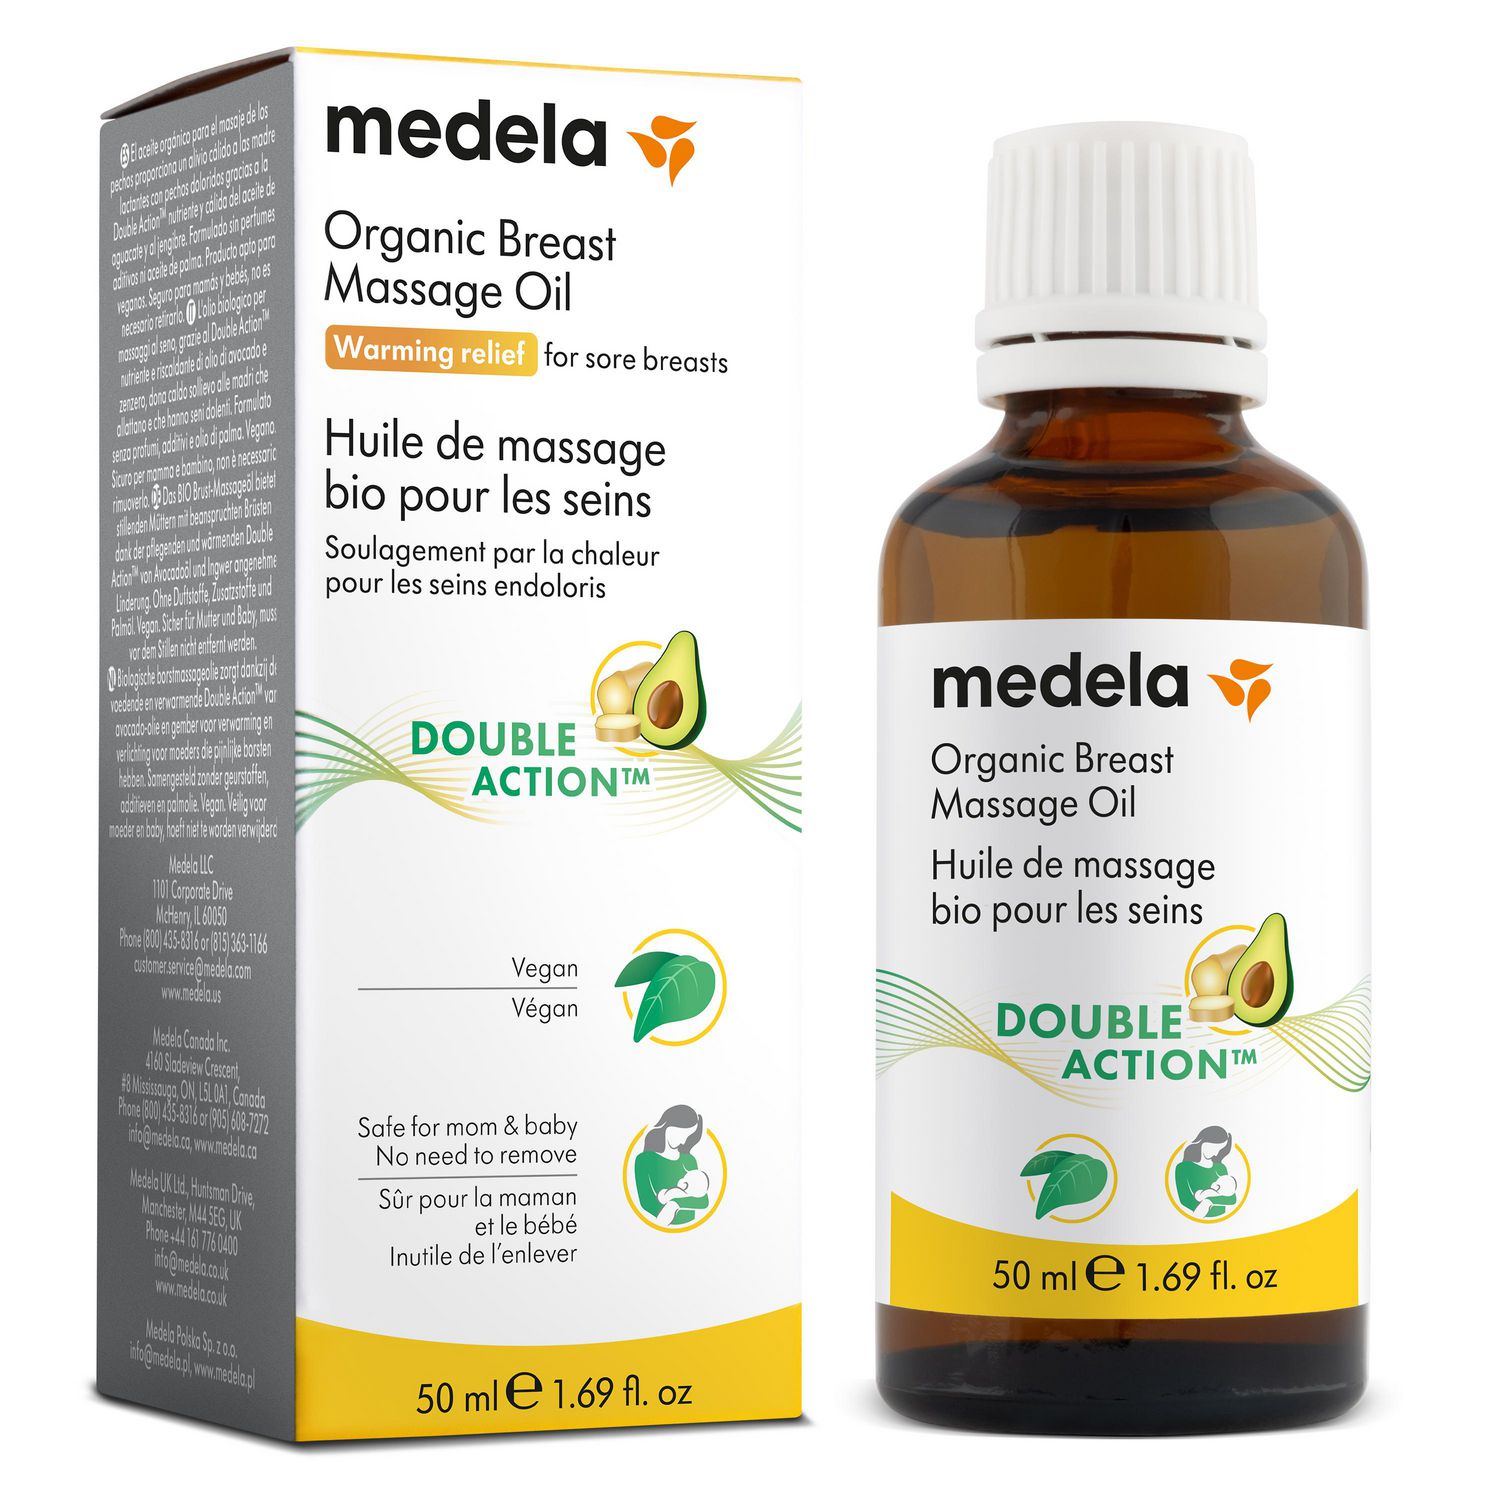 Medela Organic Breast Massage Oil, Relieve Breast Tenderness and Fullness 